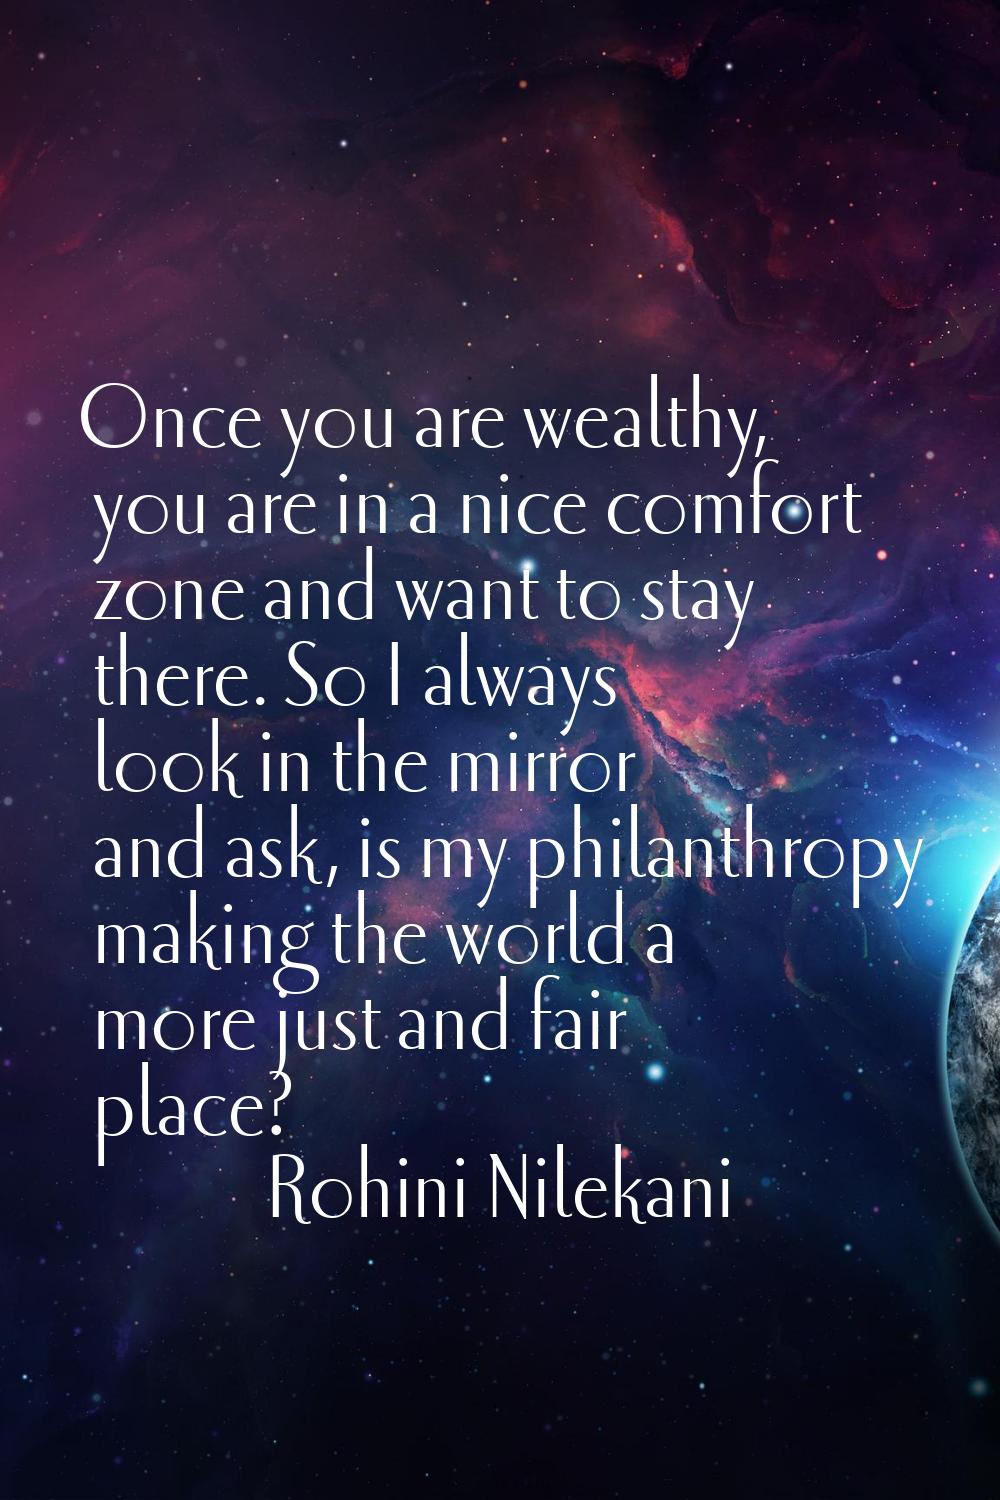 Once you are wealthy, you are in a nice comfort zone and want to stay there. So I always look in th